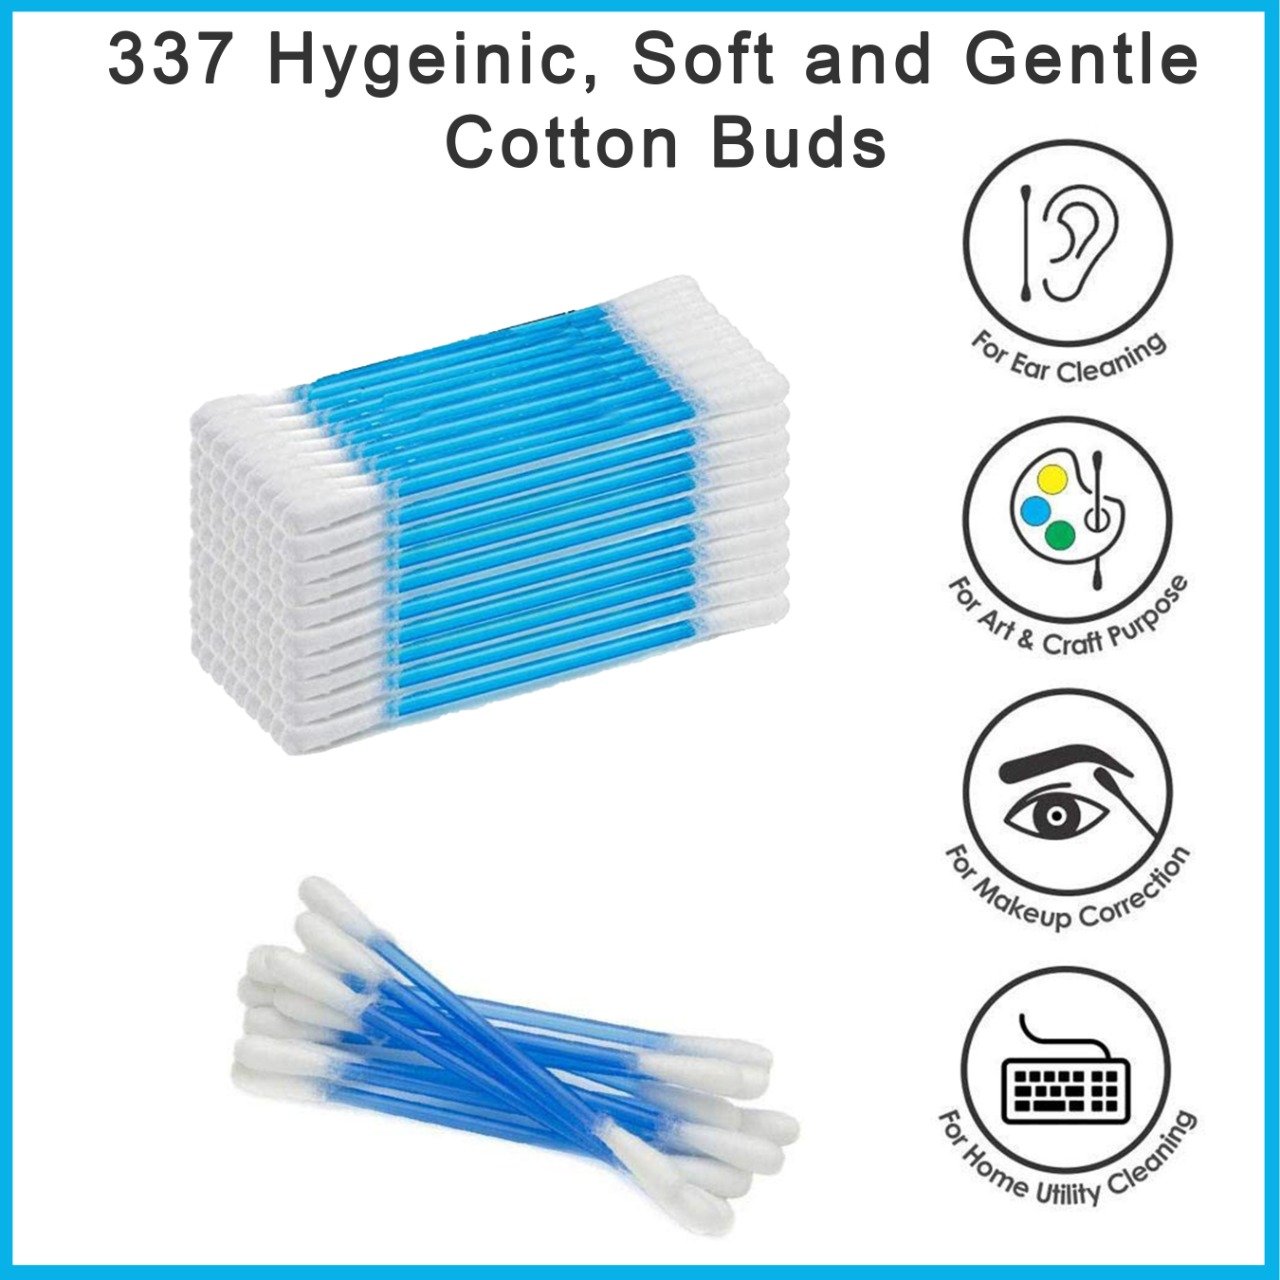 0337 Hygeinic, Soft and Gentle Cotton Buds (100pcs, 200 Swabs) - SkyShopy